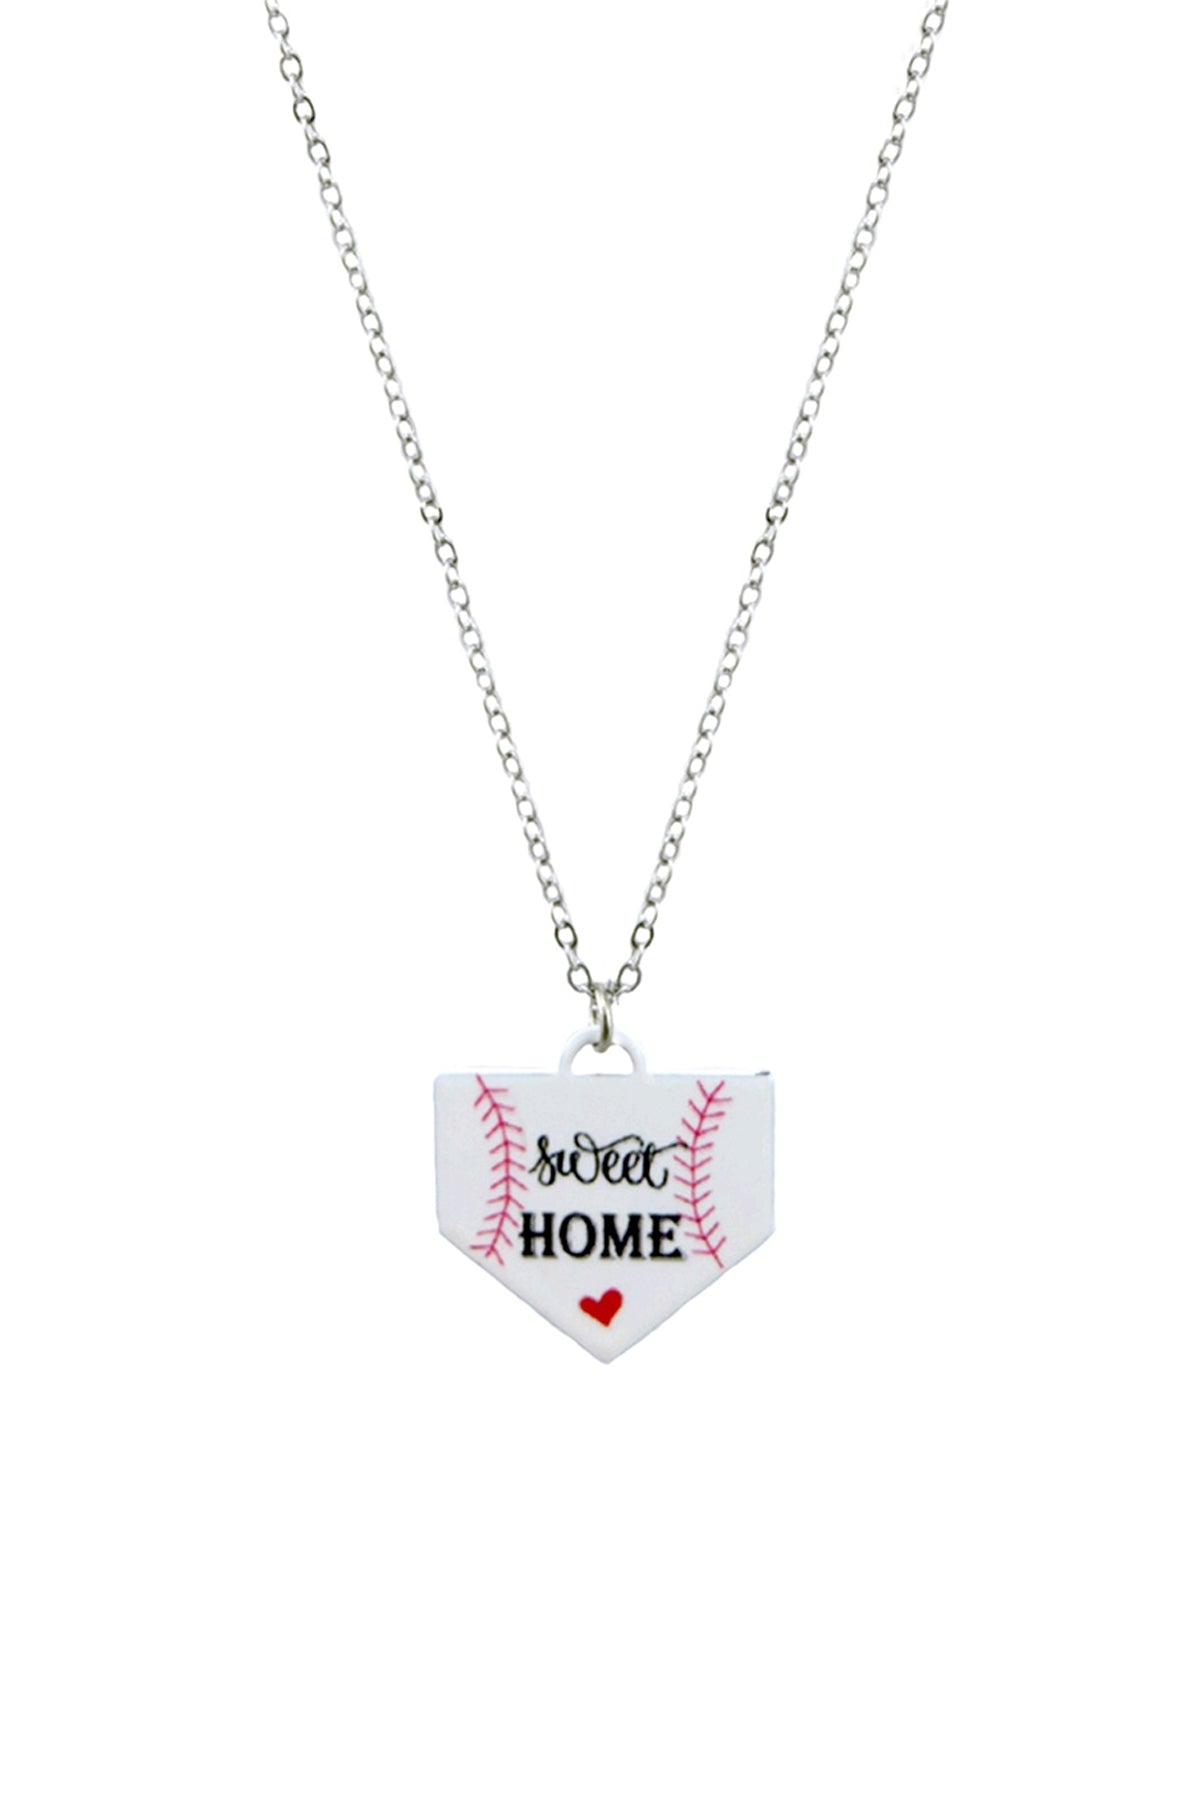 BASEBALL SWEET HOME PLATE PENDANT NECKLACE (NOW $1.50 ONLY!)